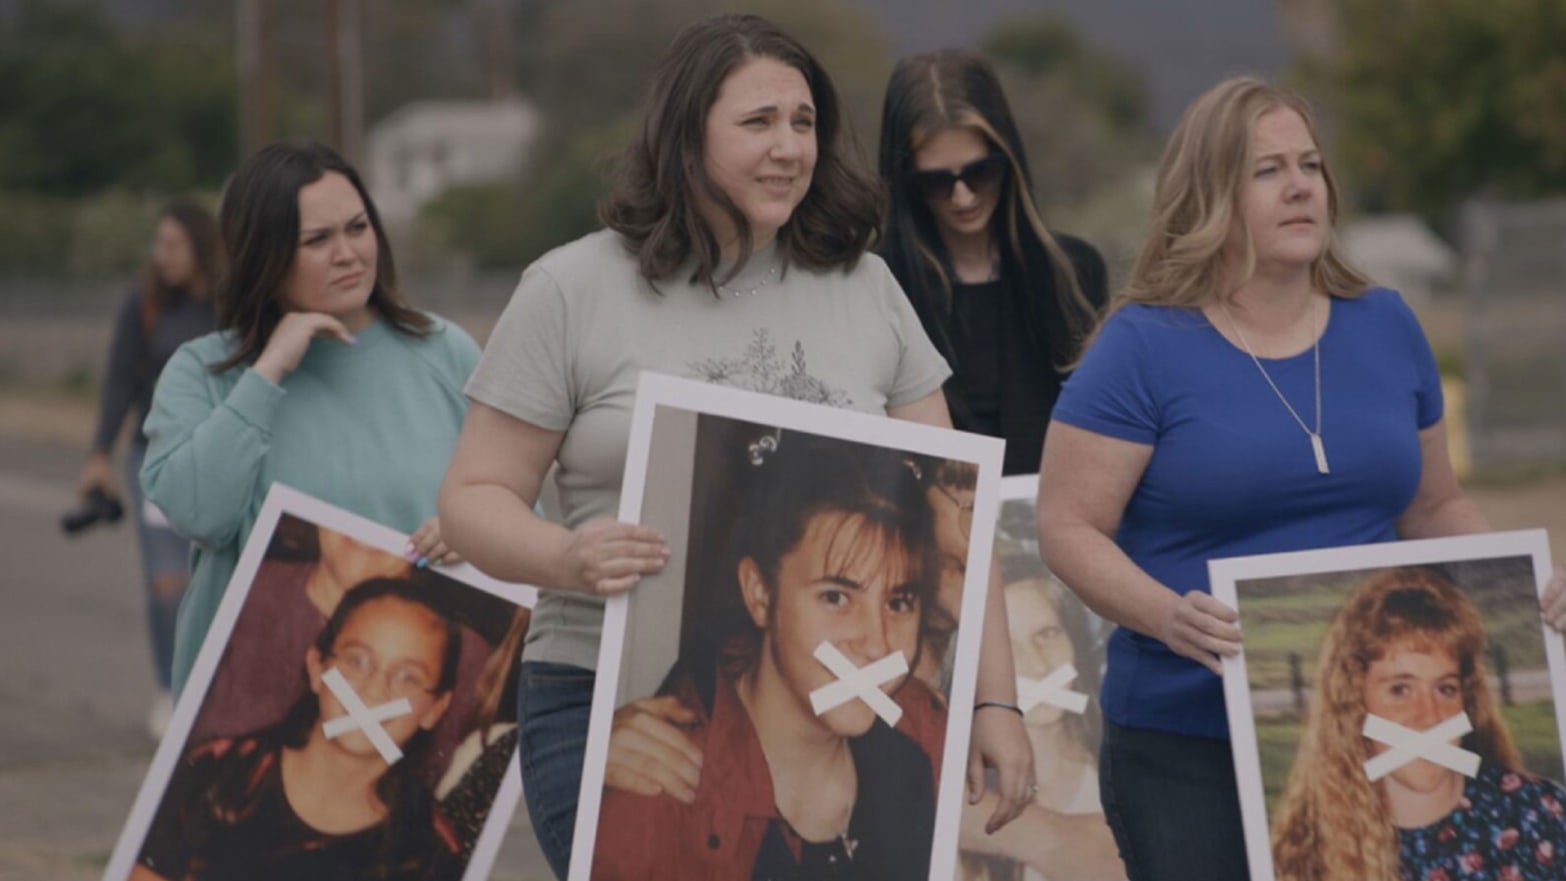 Women march holding pictures of their younger selves with x's crossed over their mouths in a still from 'Let Us Prey'